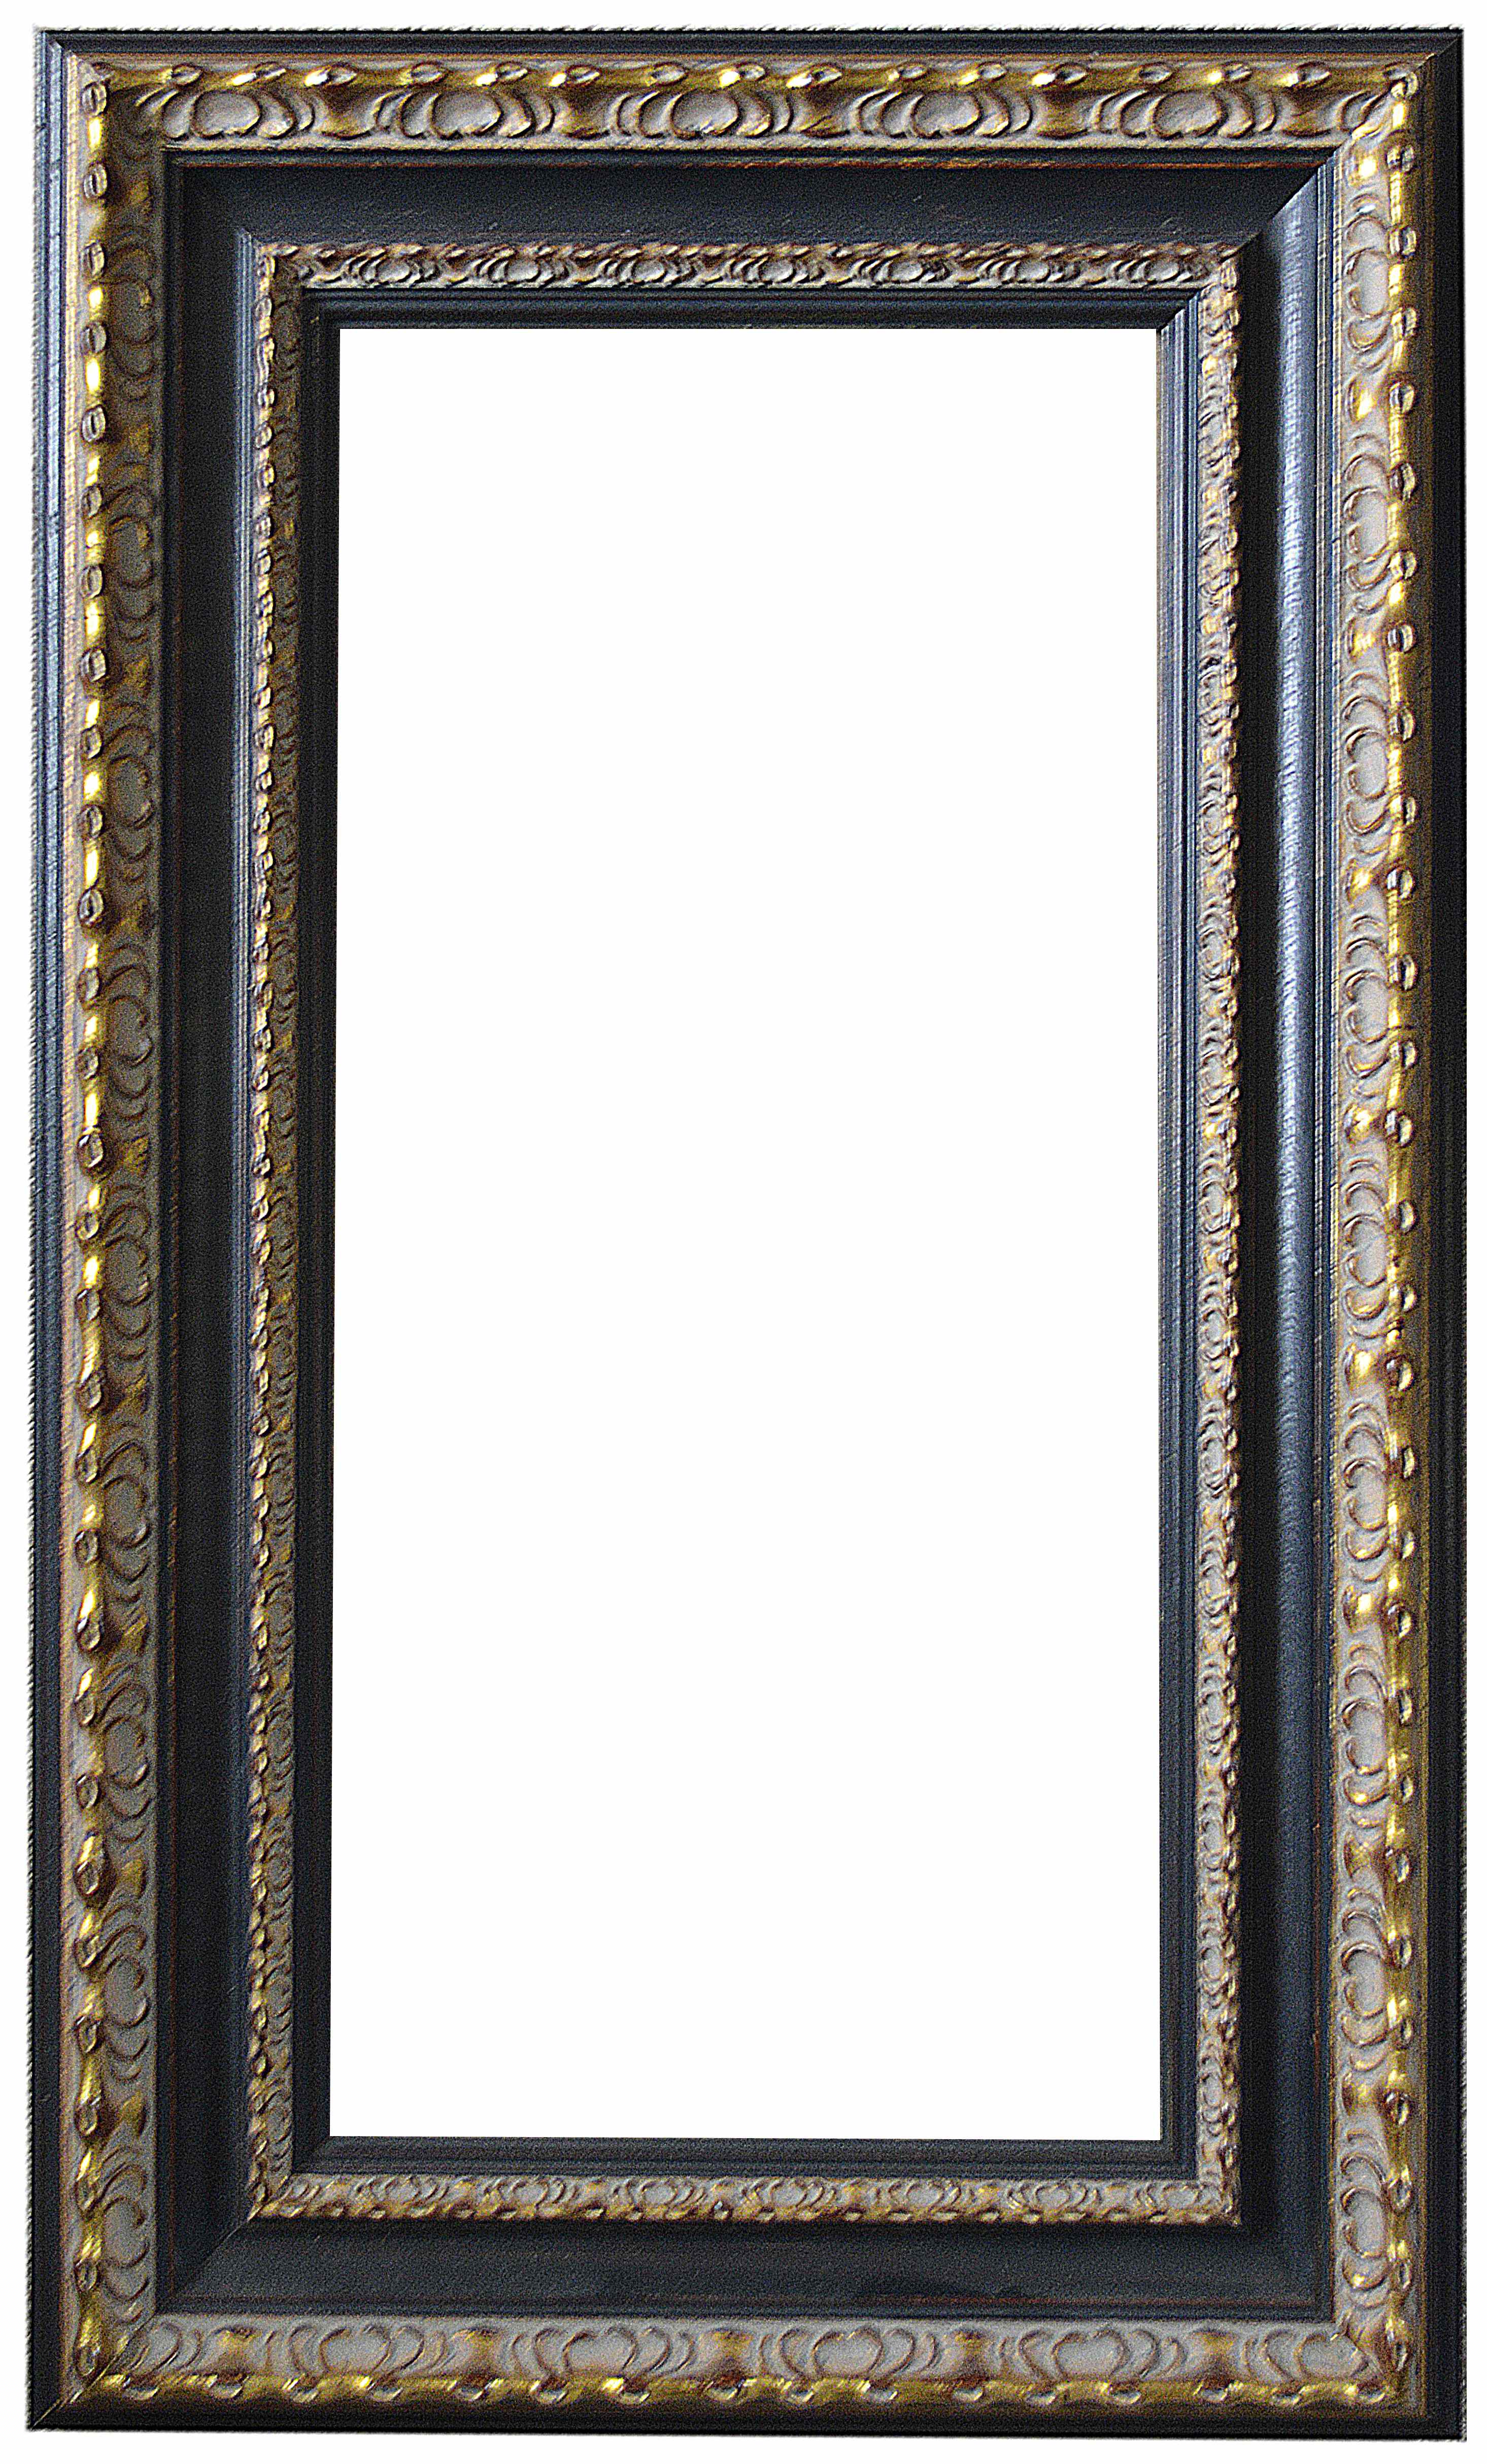 A collection of four ornate picture frames
the moulded black and gilt wood frames of various